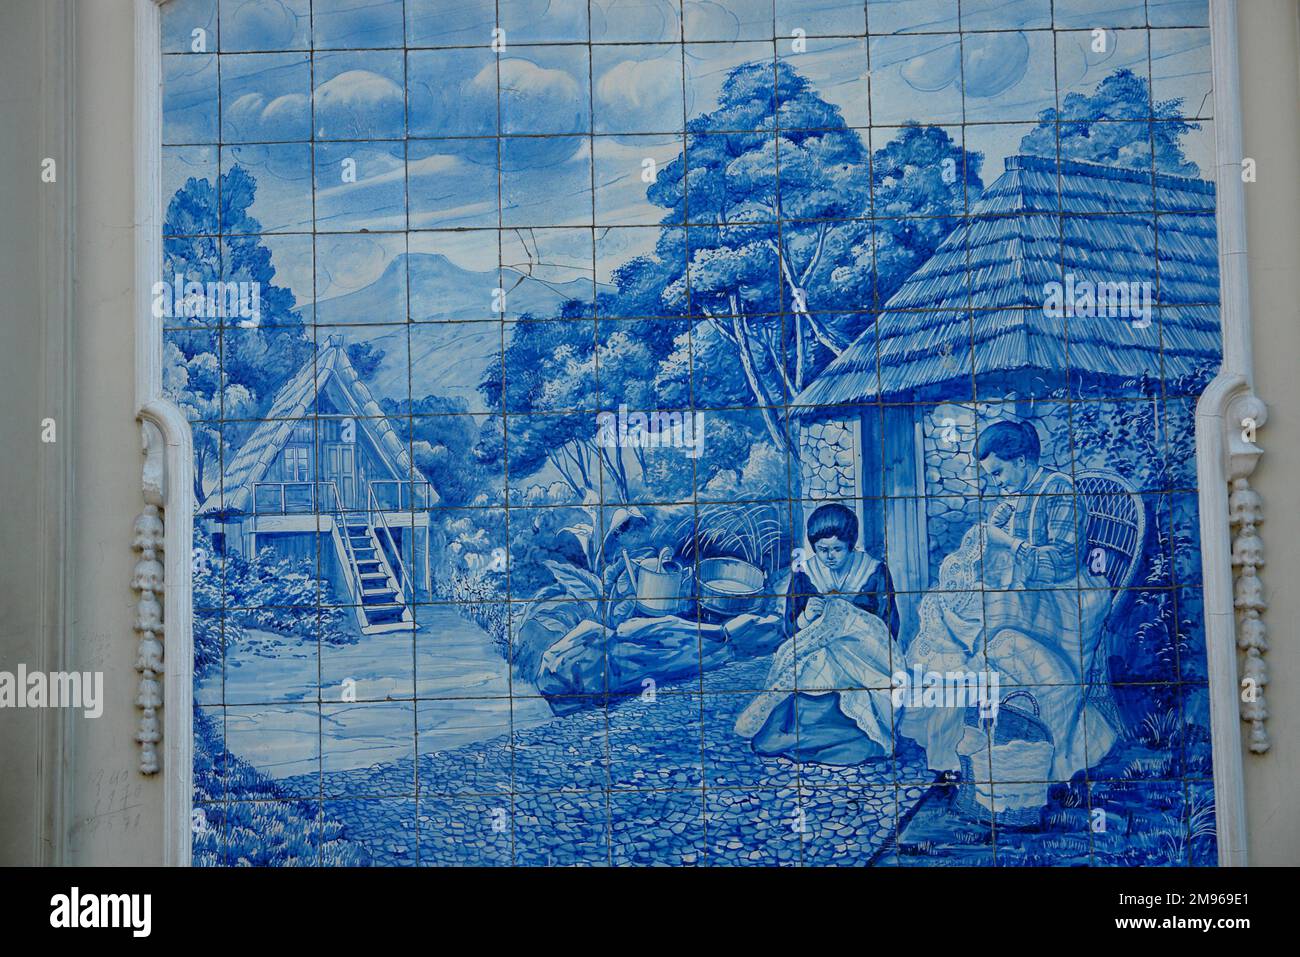 A picture on blue tiles outside the former Ritz Cafe, in the Avenida Arriaga in Funchal, Madeira, Portugal. This type of traditional design, on blue and white tin-glazed ceramic tiles, is known in Spain and Portugal as azulejo or azulejos. Stock Photo